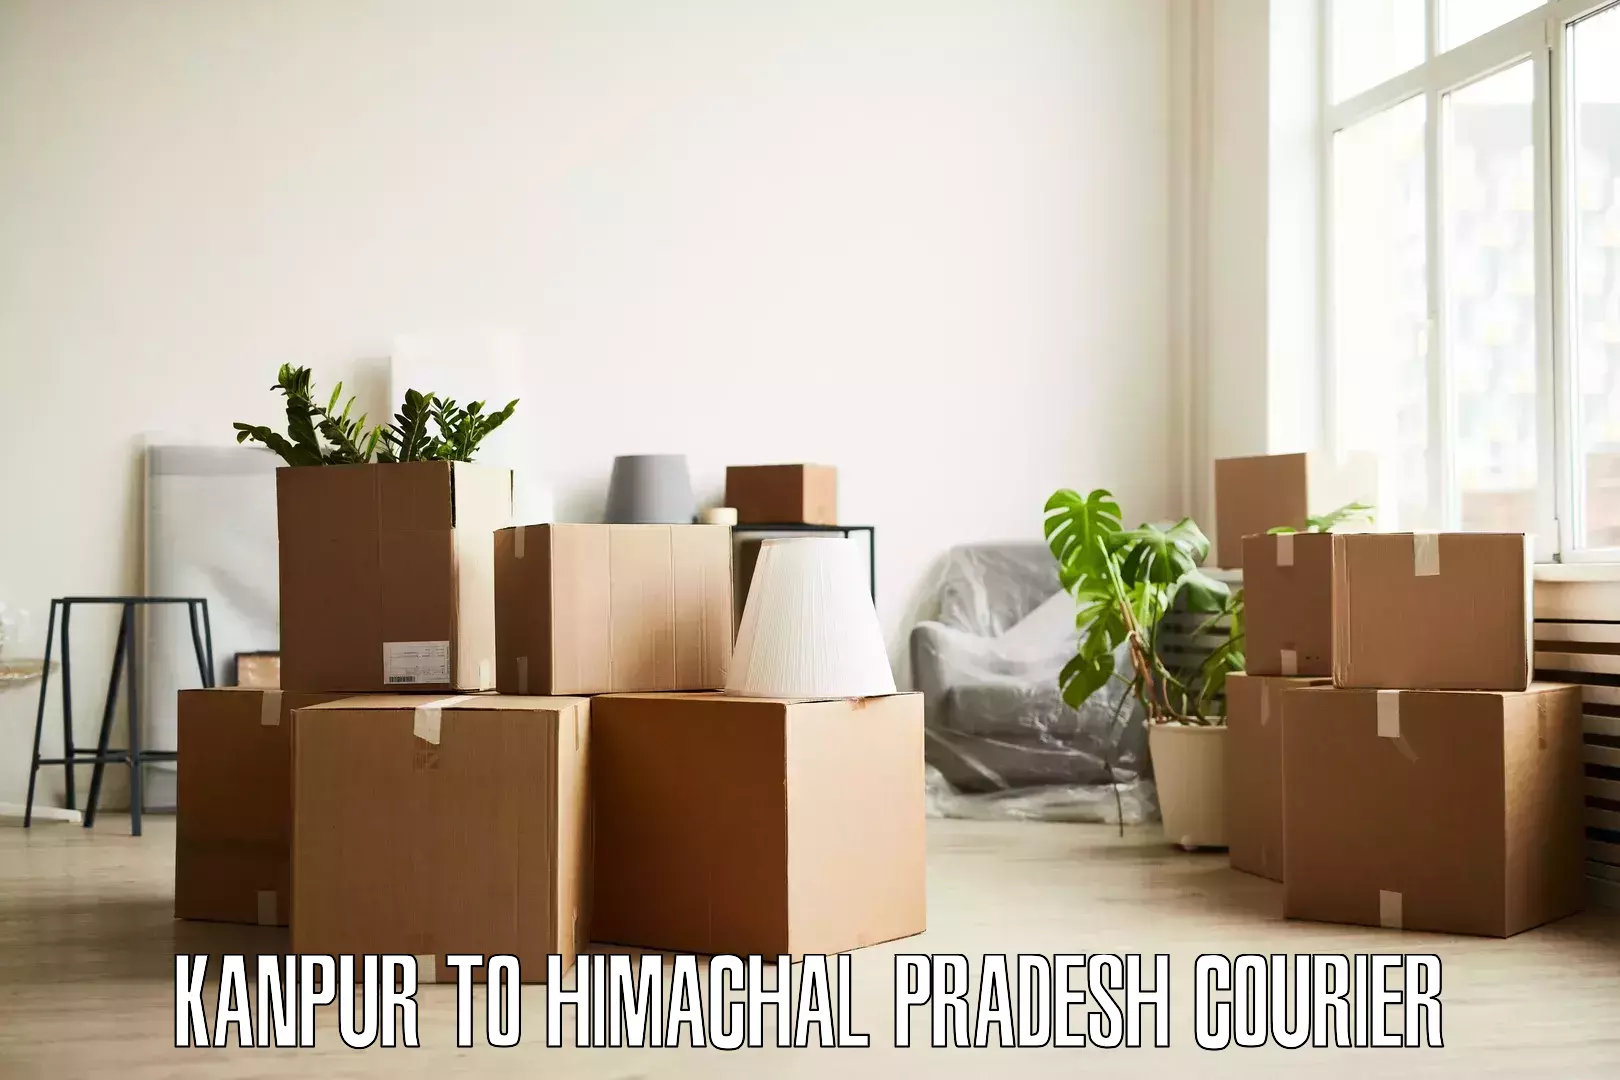 Quality relocation services Kanpur to Nalagarh